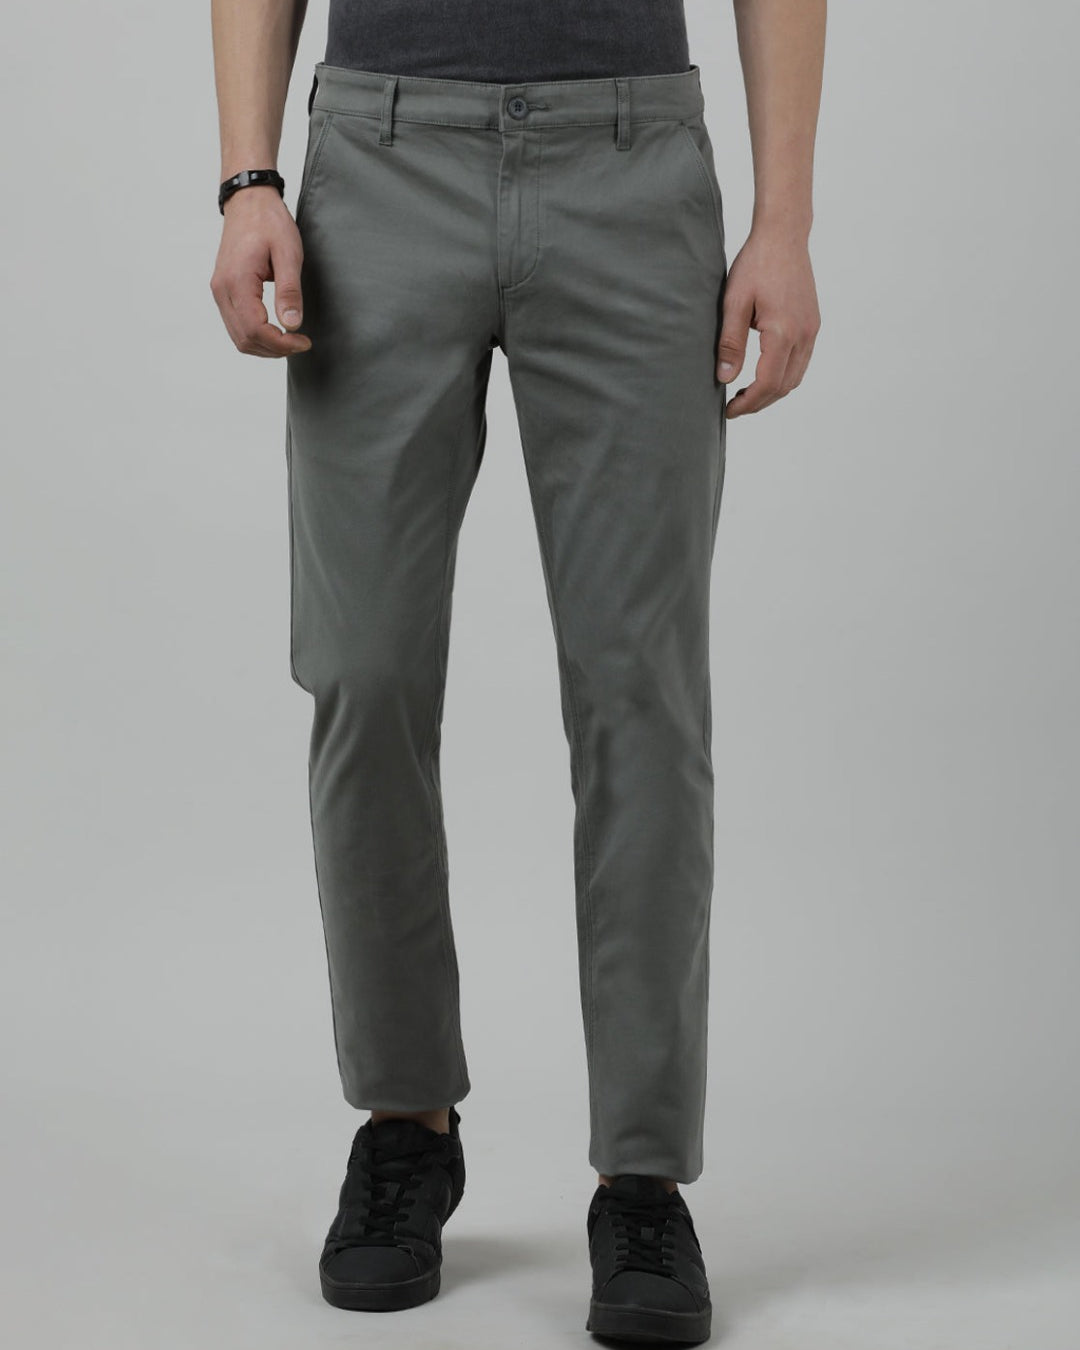 Casual Slim Fit Solid Military Green Trousers for Men